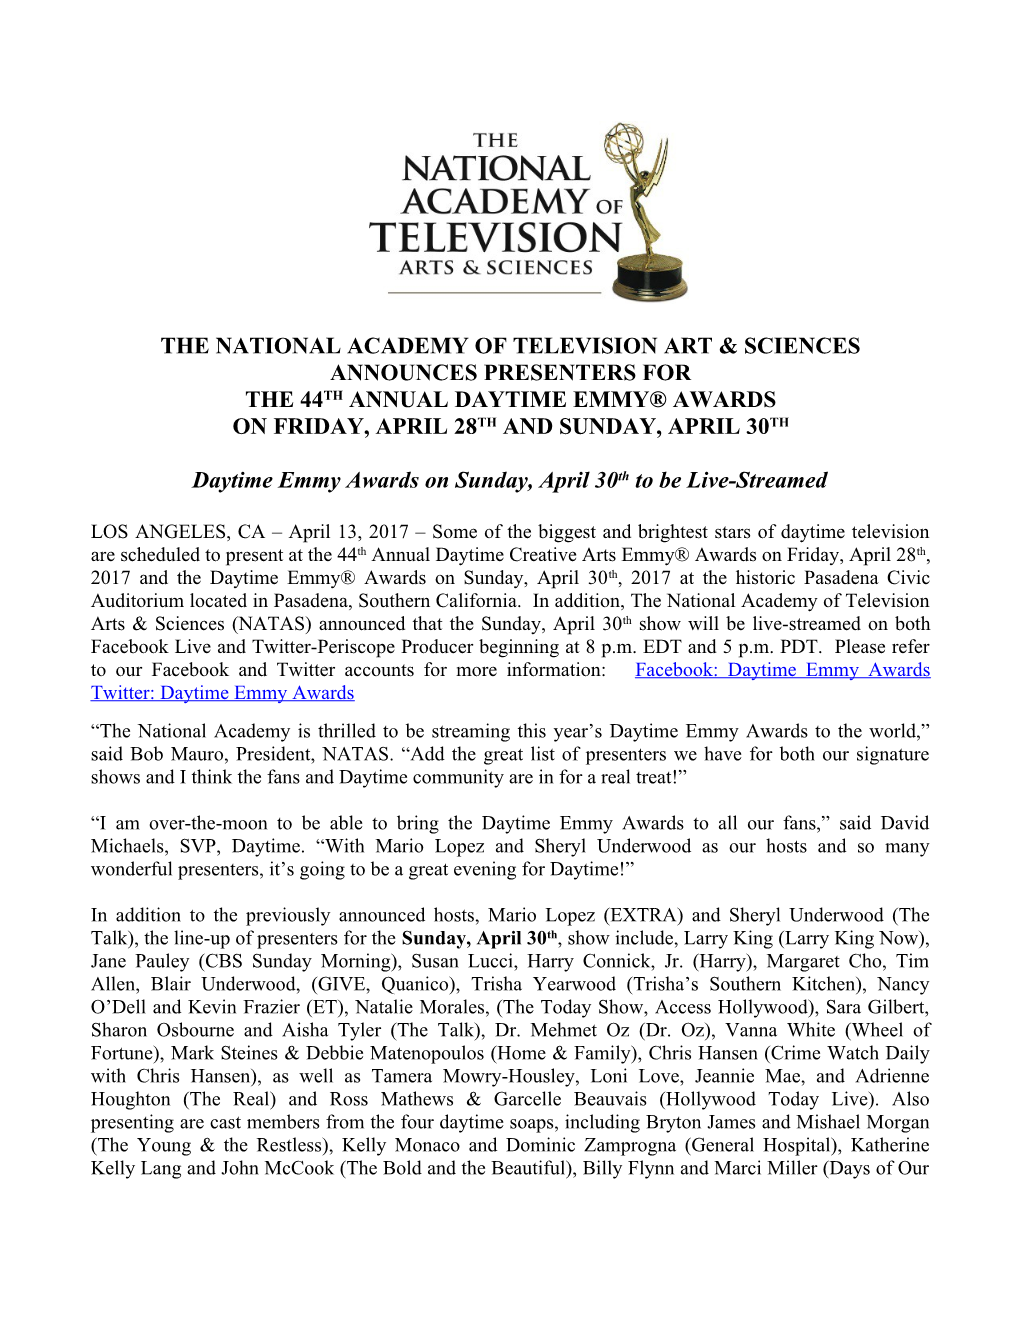 The National Academy of Television Art & Sciences Announces Presenters For